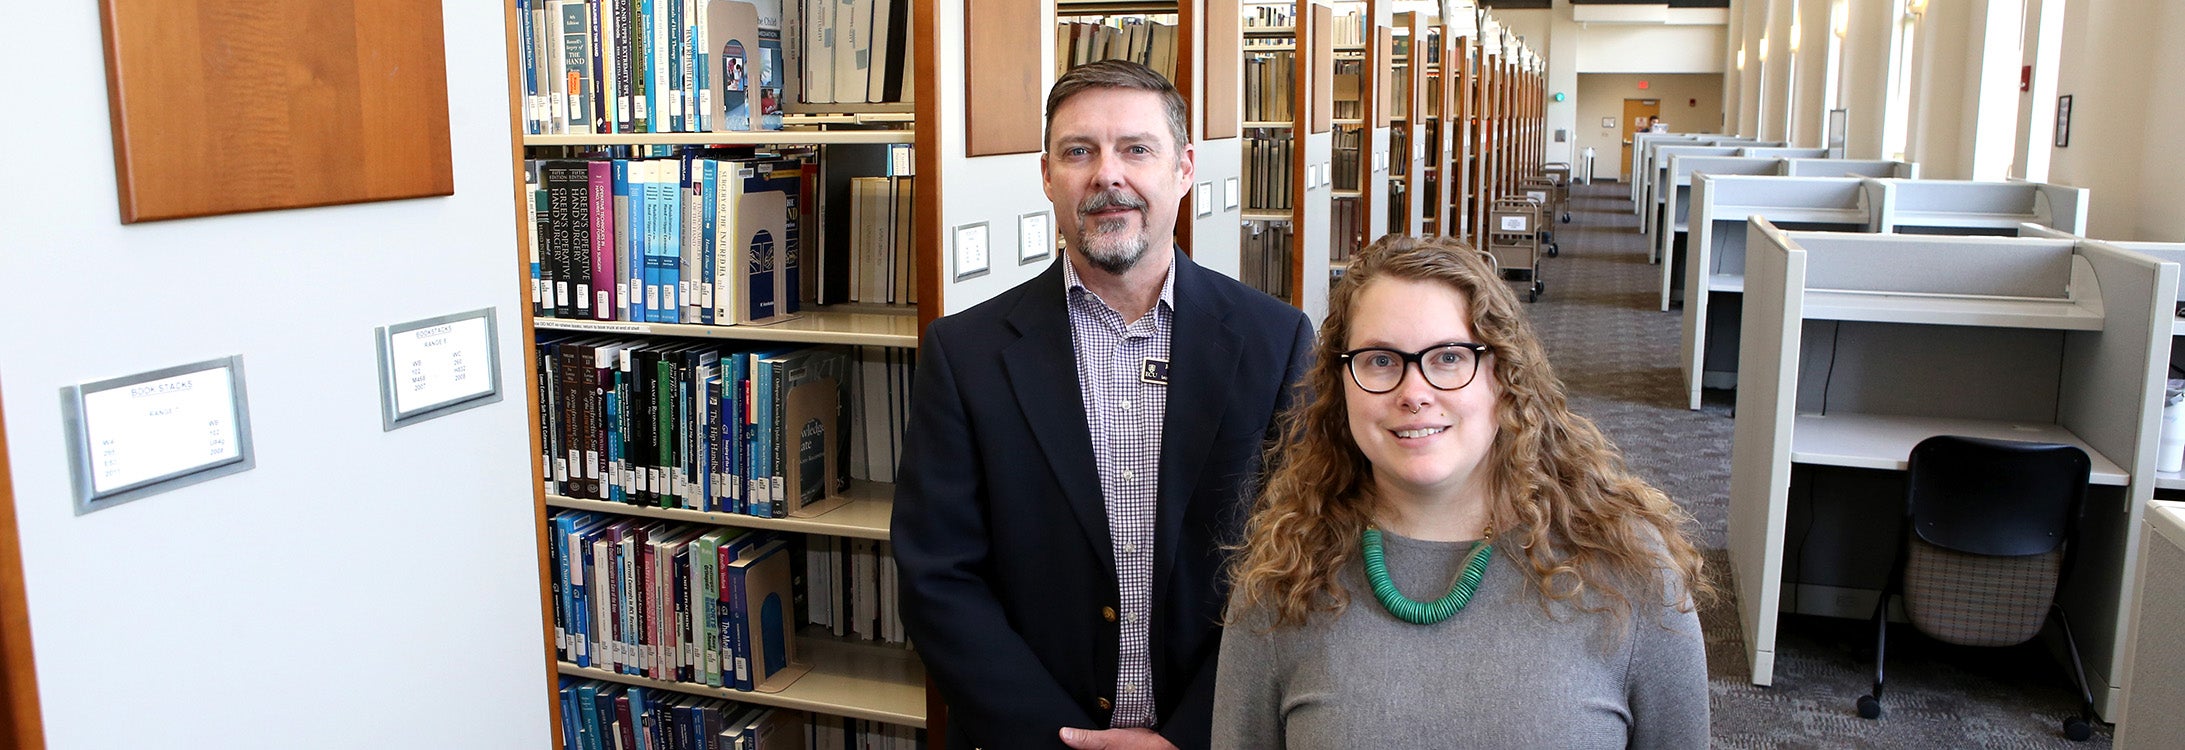 Roger Russell, associate director of Laupus Library, and Jamie Bloss, library associate professor and Laupus liaison librarian, partnered to lead a grant to improve digital literacy and broadband access for migrant farmworkers. (ECU photos by Benjamin Abel)